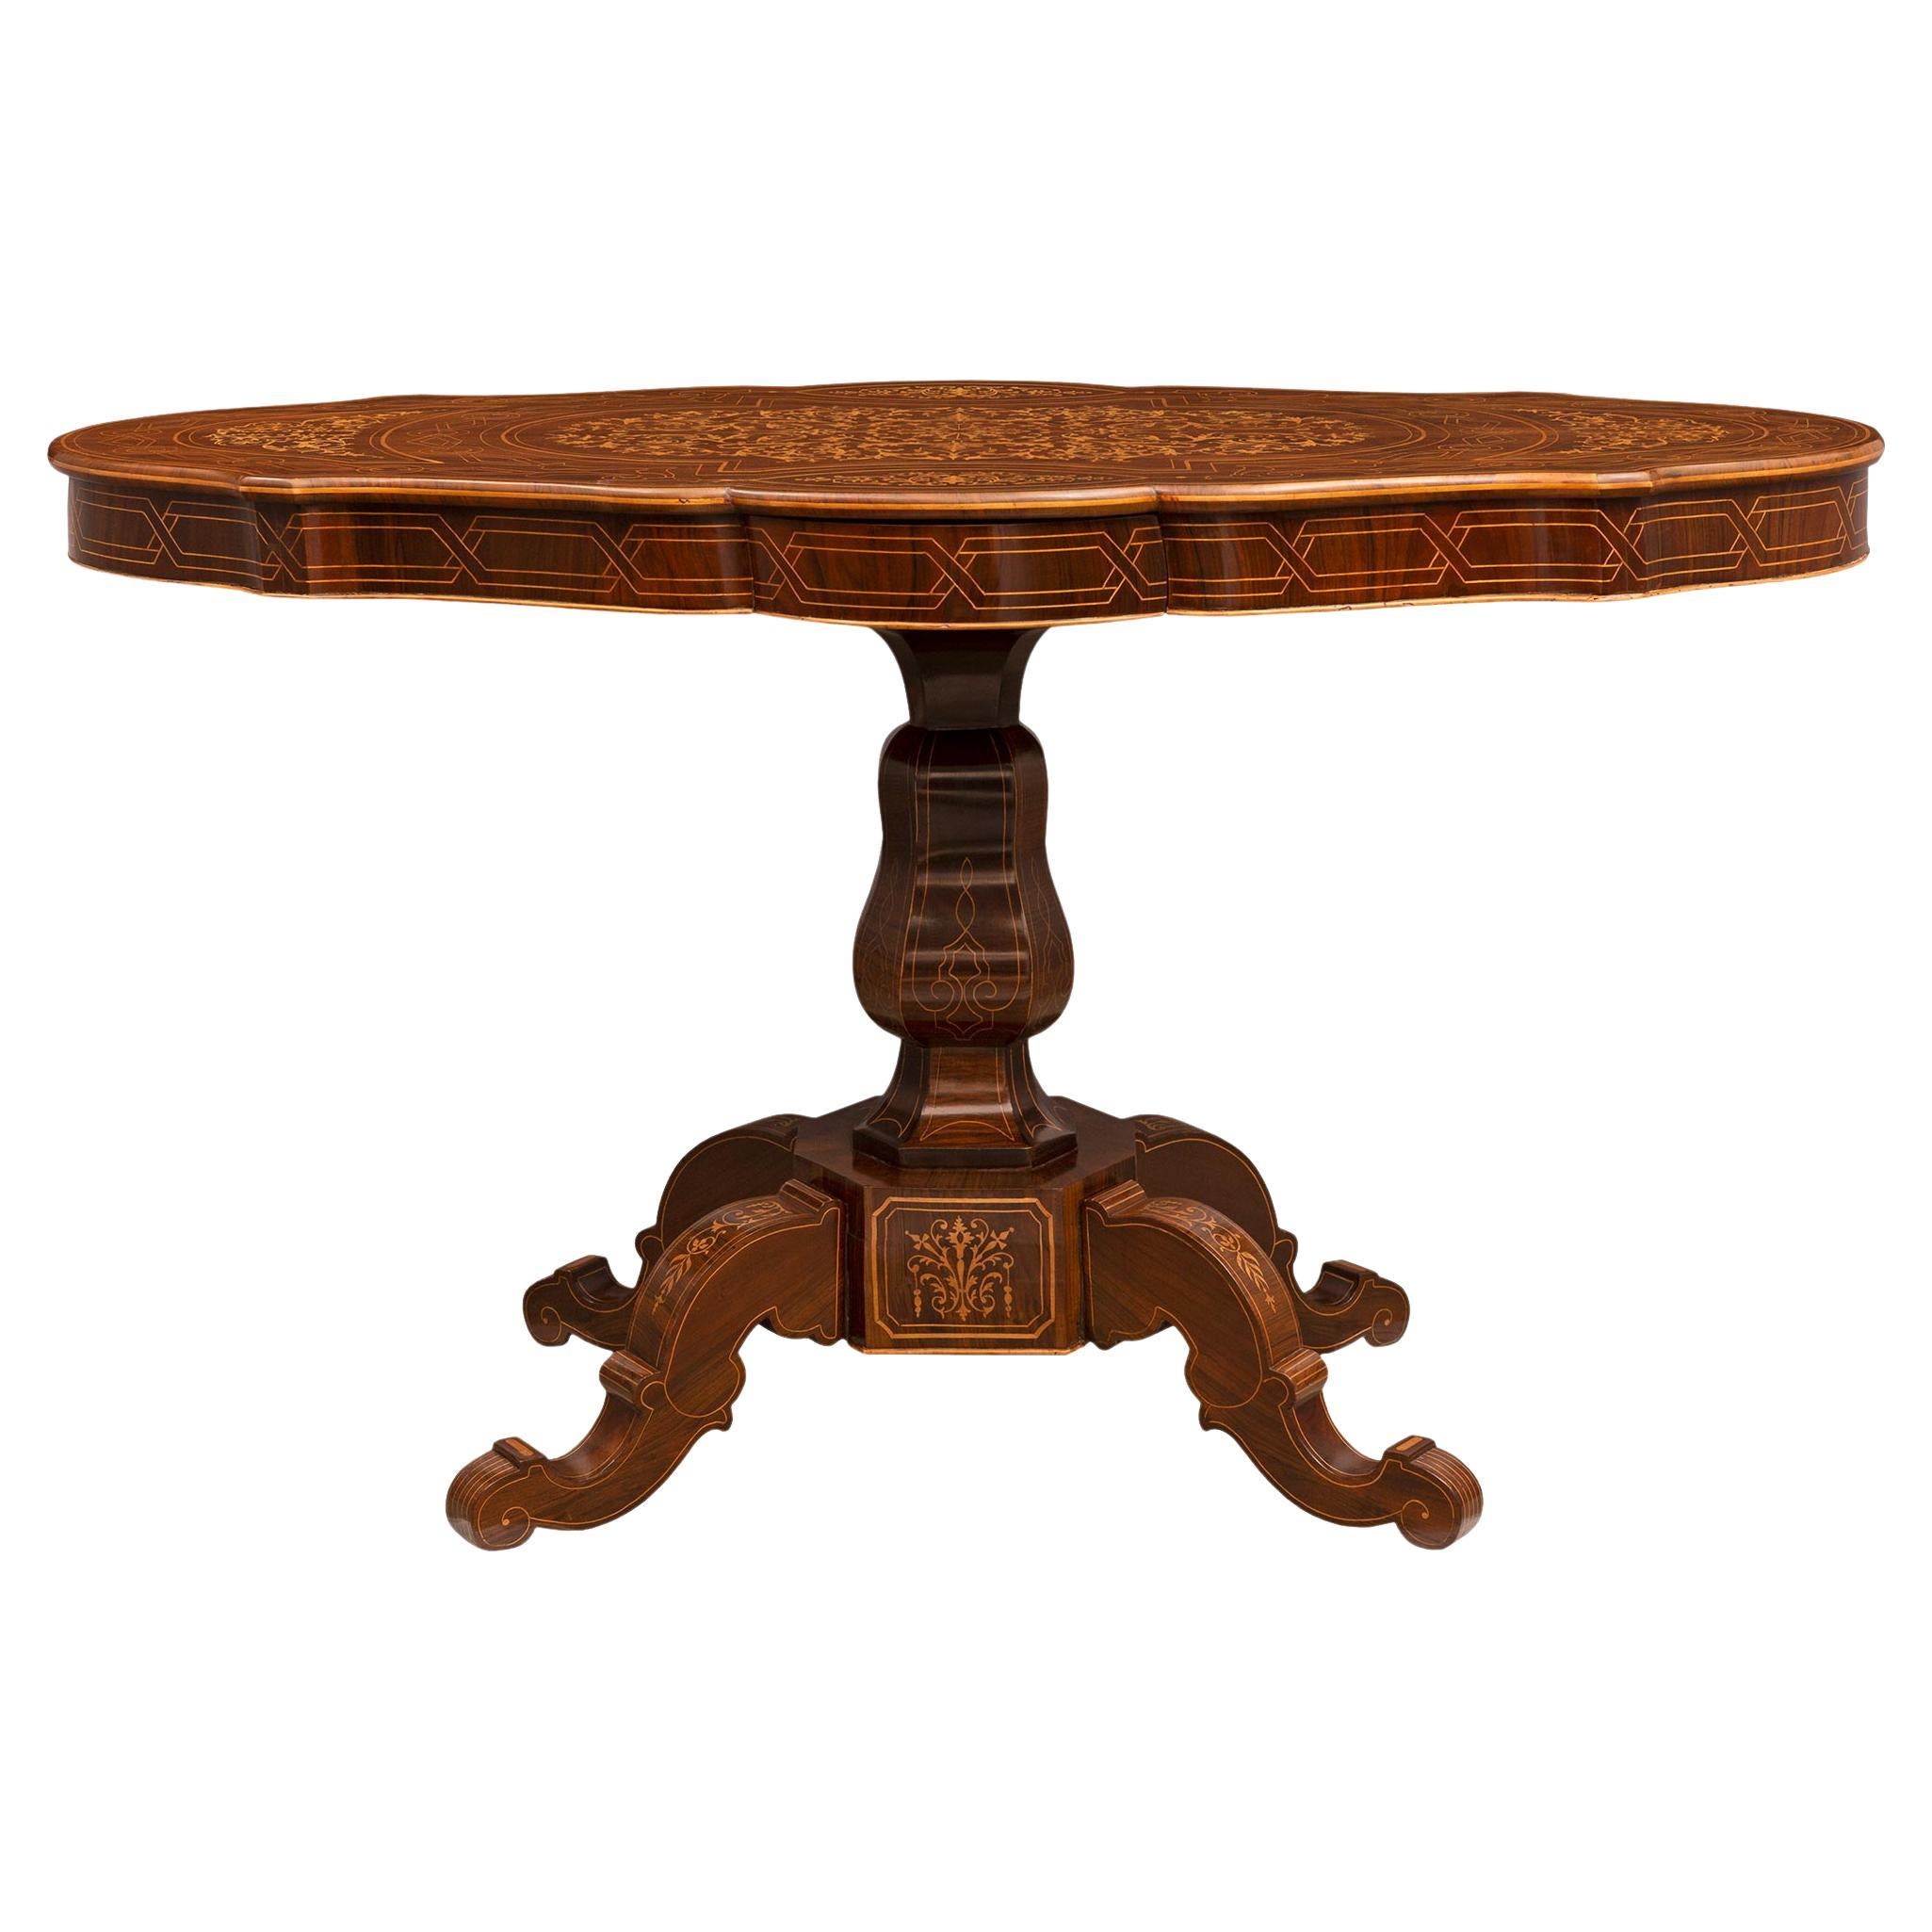 Italian 19th Century Charles X Period Walnut and Maplewood Inlaid Table For Sale